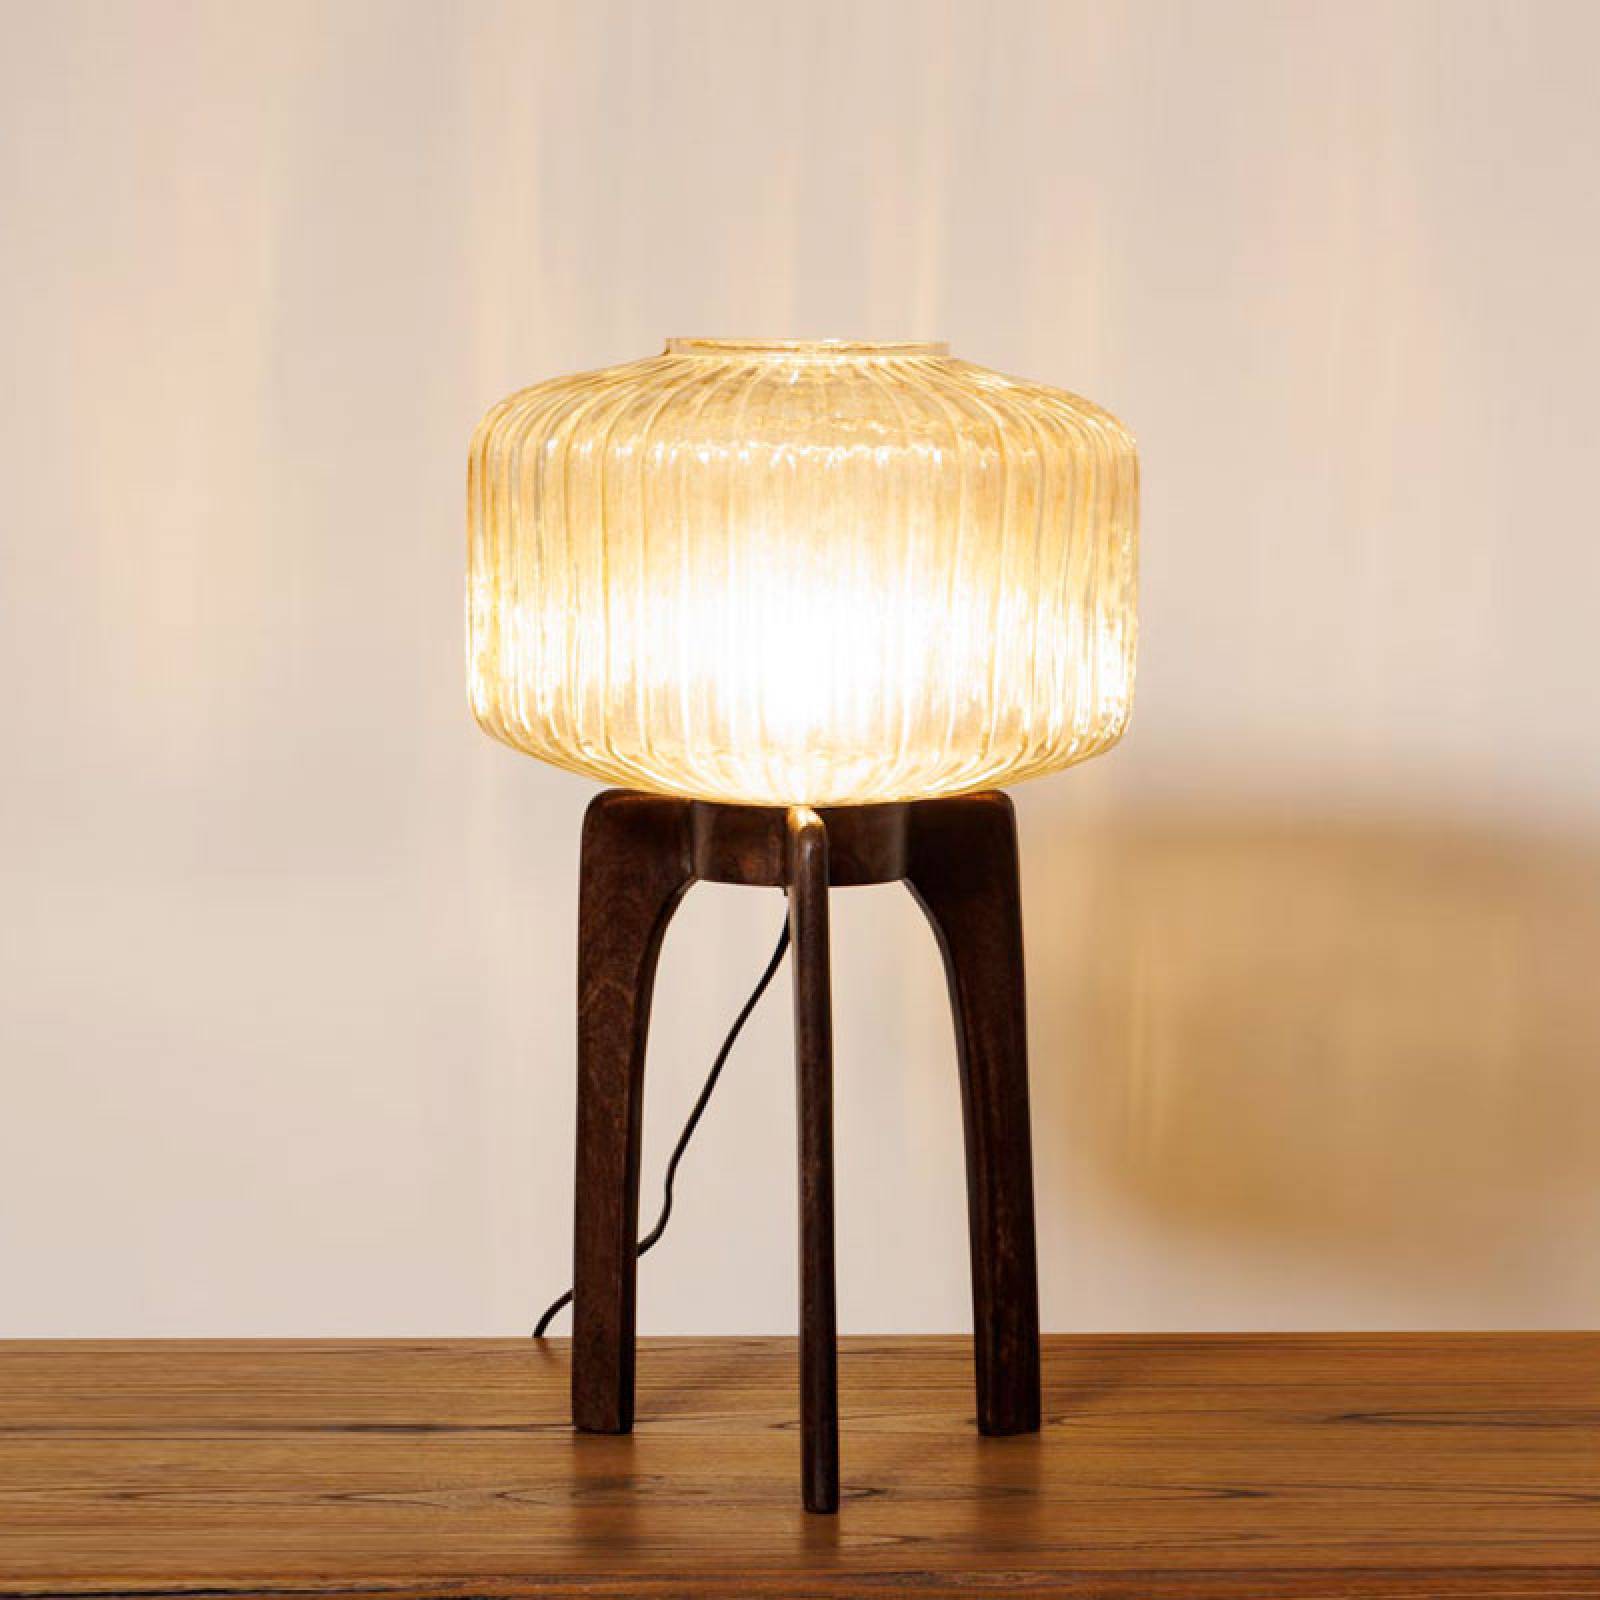 Wooden Tripod Lamp With Glass RIbbed Shade H: 50cm thumbnails